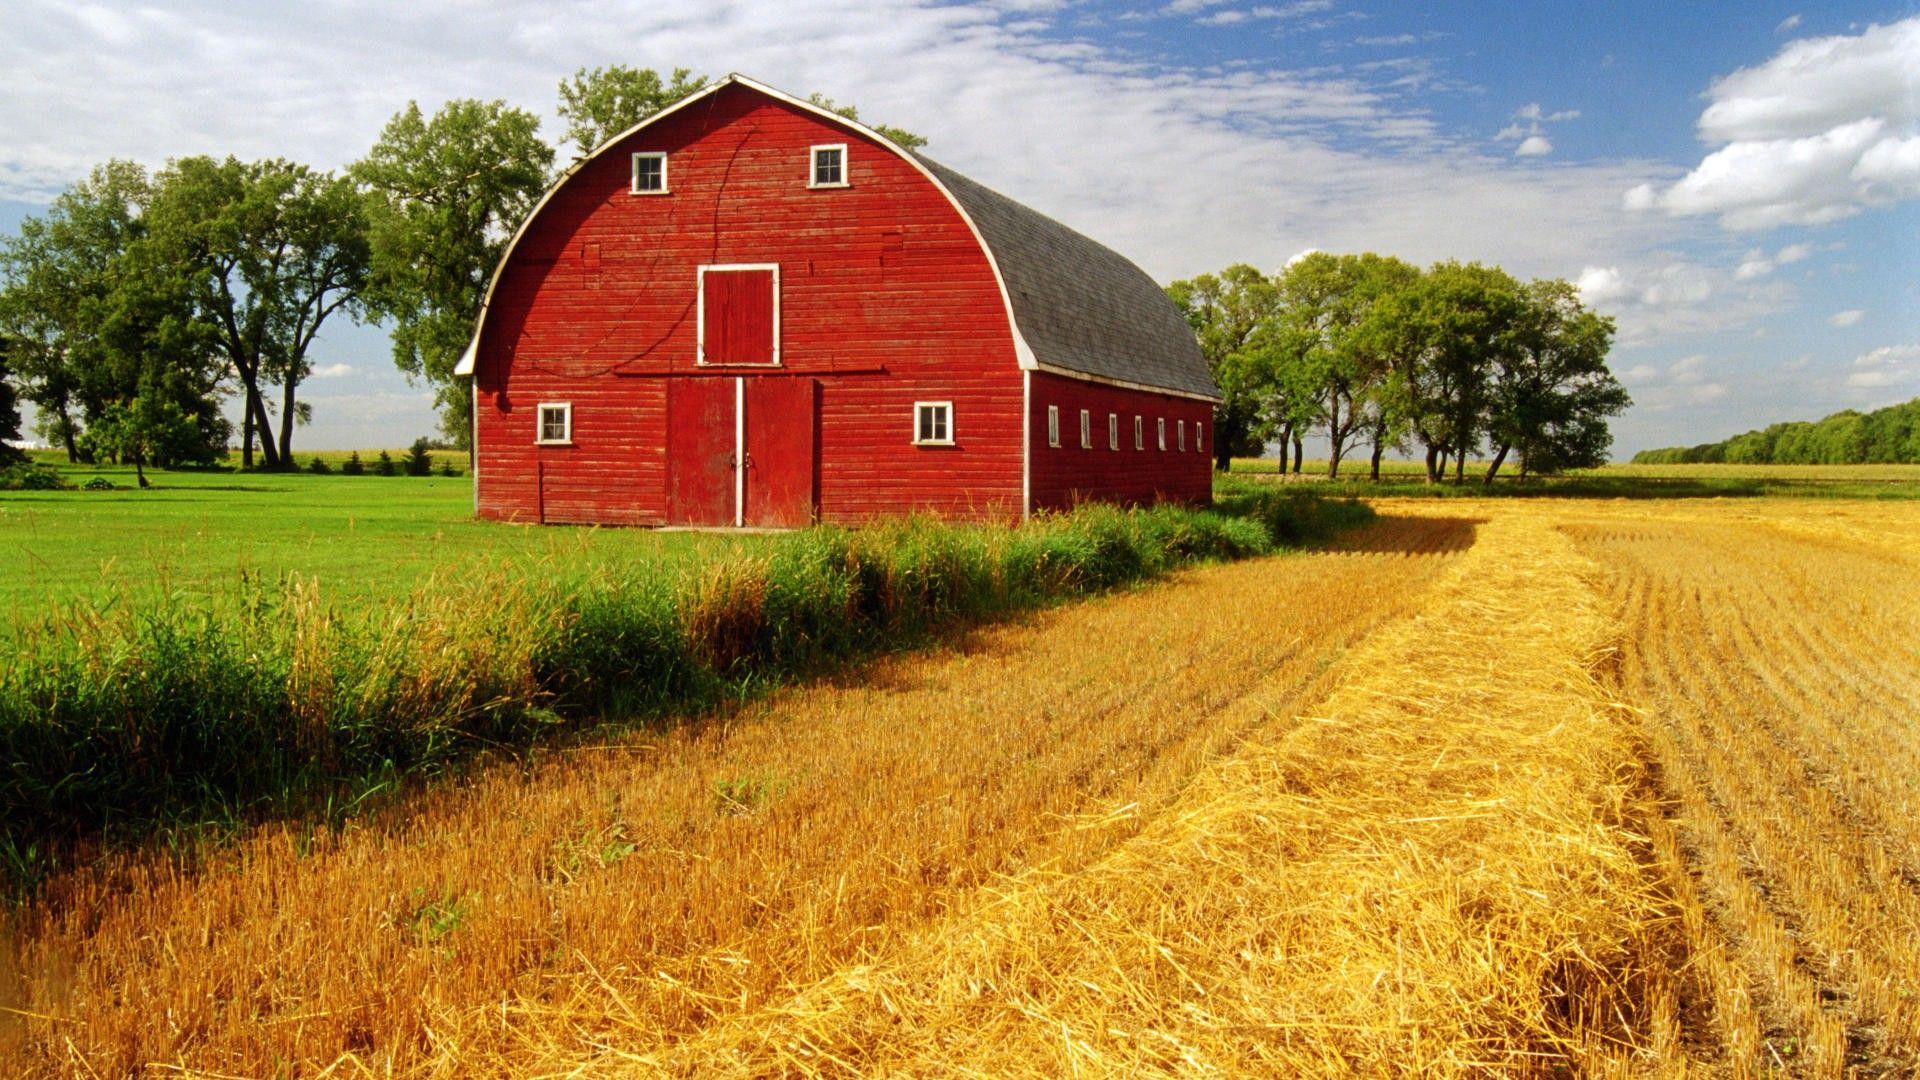 Download Barn wallpapers for mobile phone free Barn HD pictures